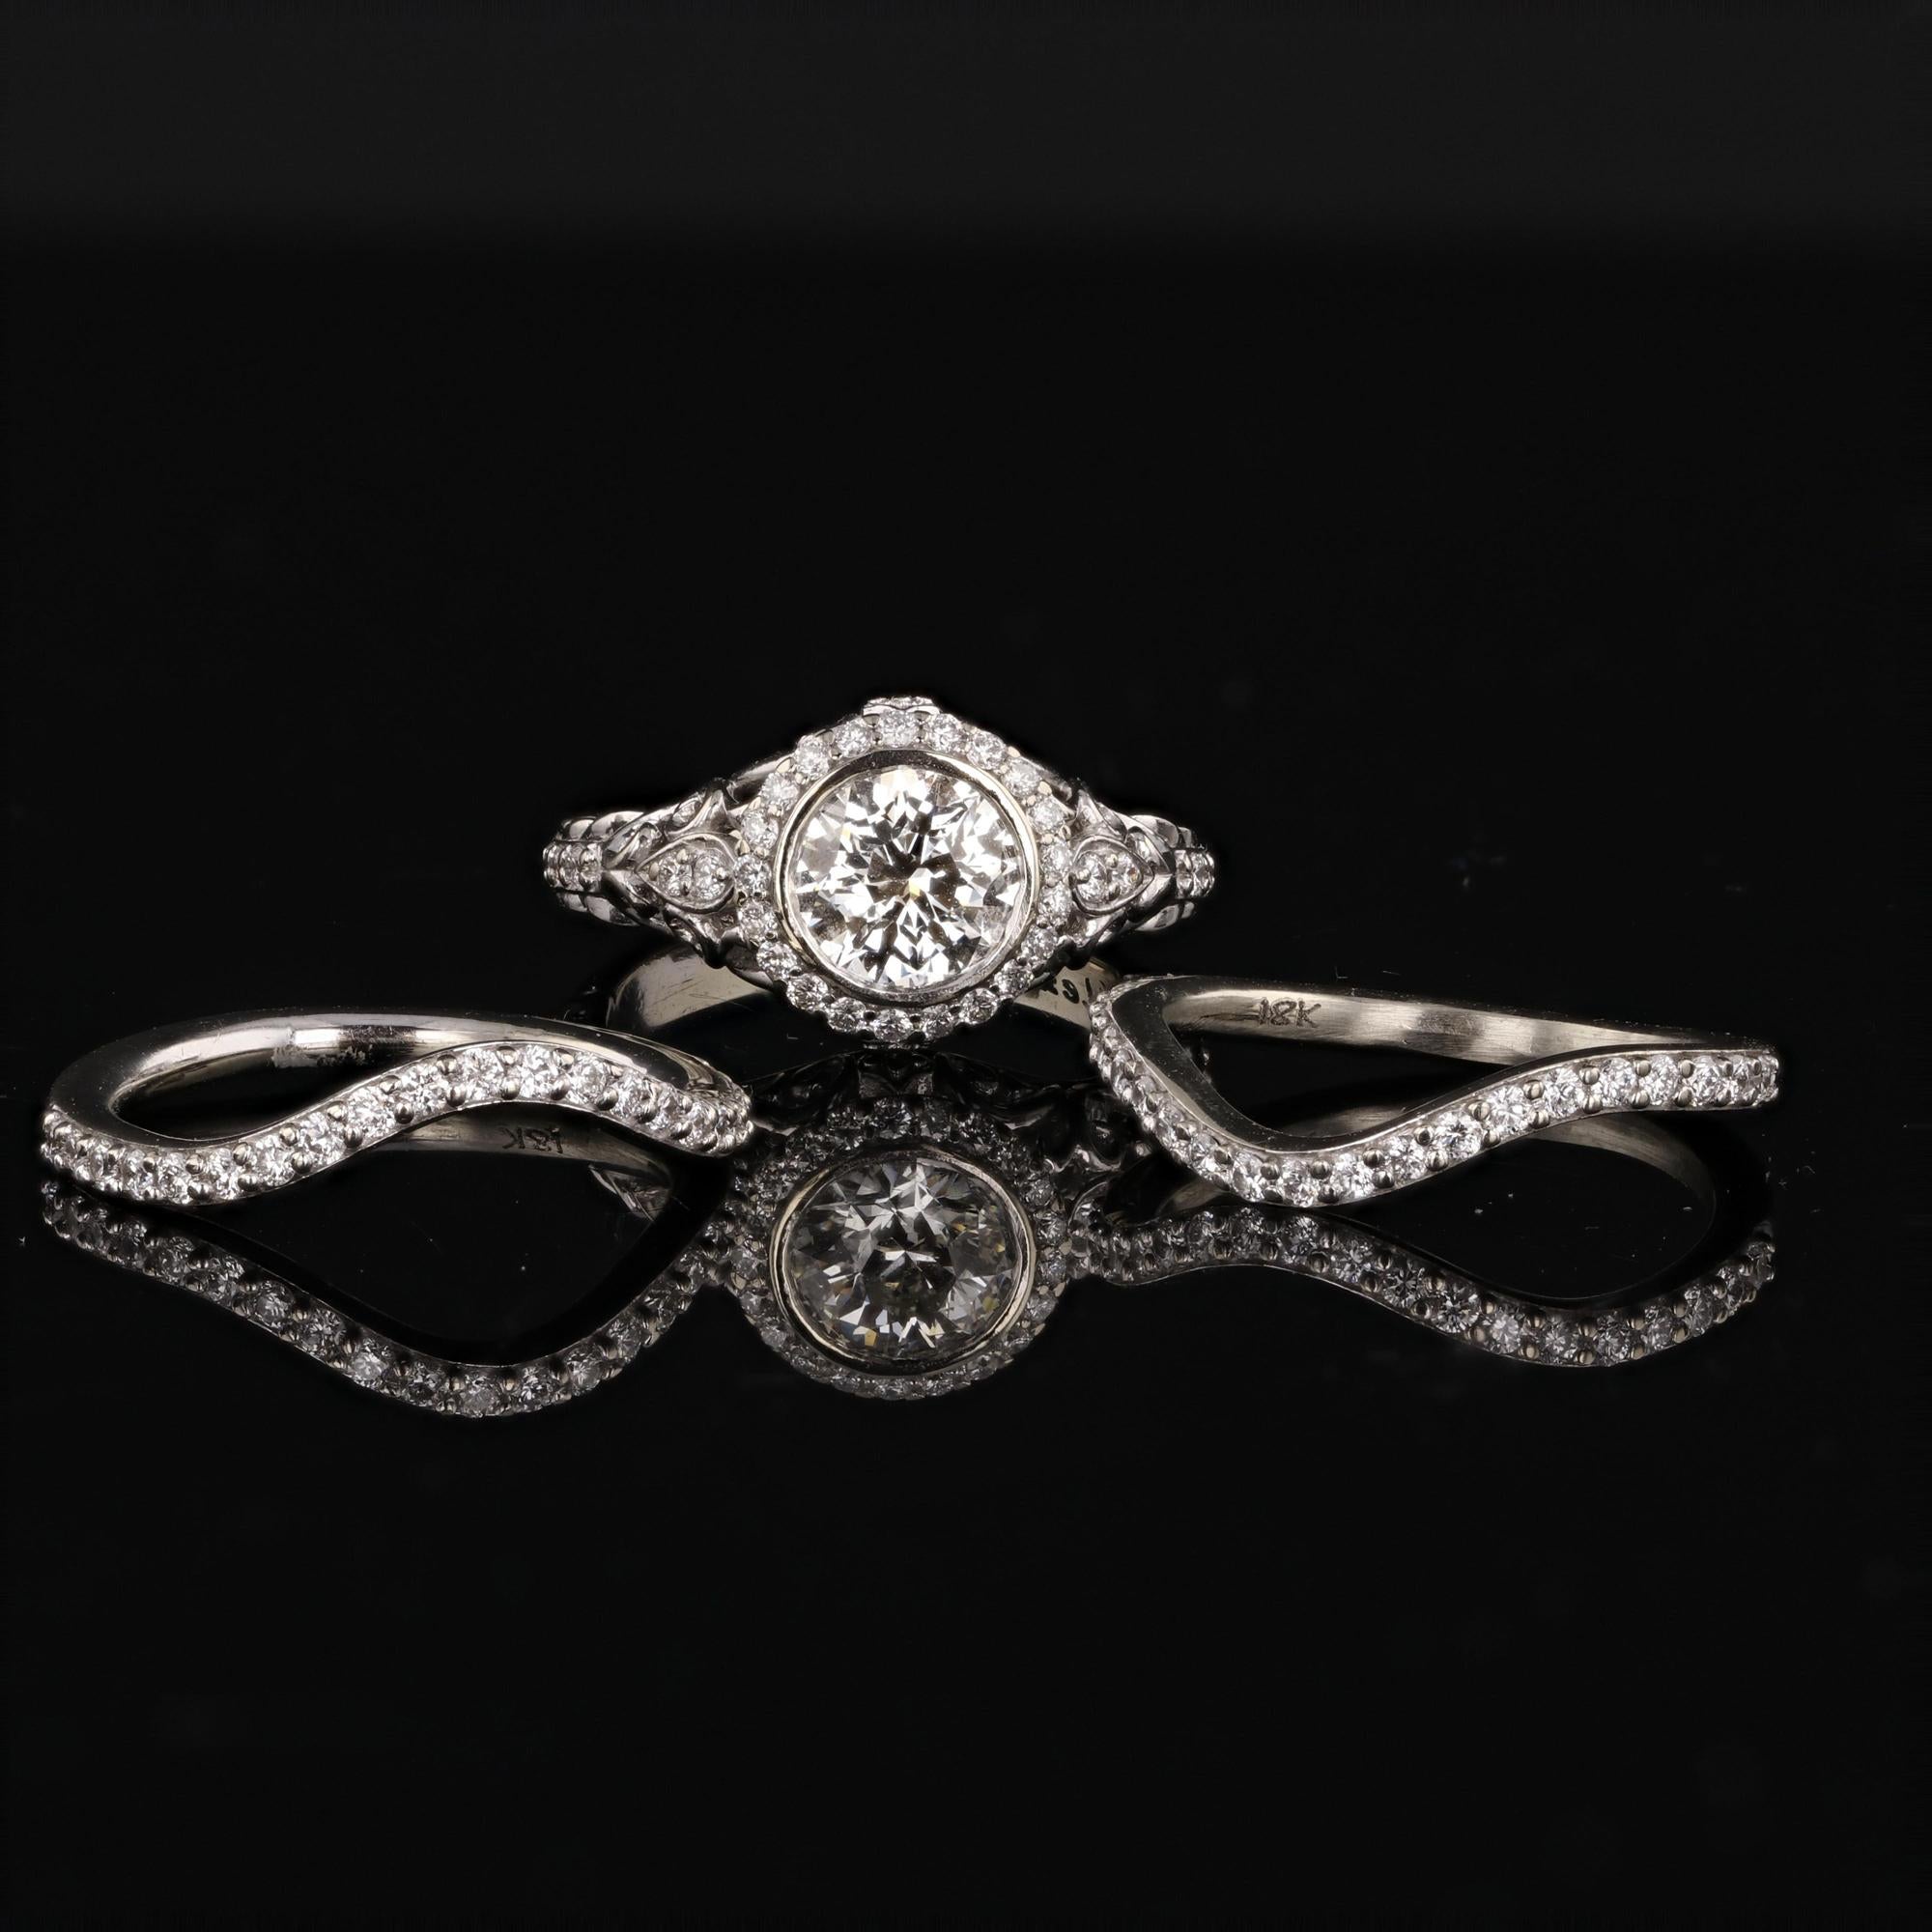 Reminiscent of another era, this Alex & Co signature vintage-style for our Bridal Collection is a magnificent 18K white gold engagement ring and elegant couture prefect fitted diamond pave matching wedding band set. The signature engagement ring